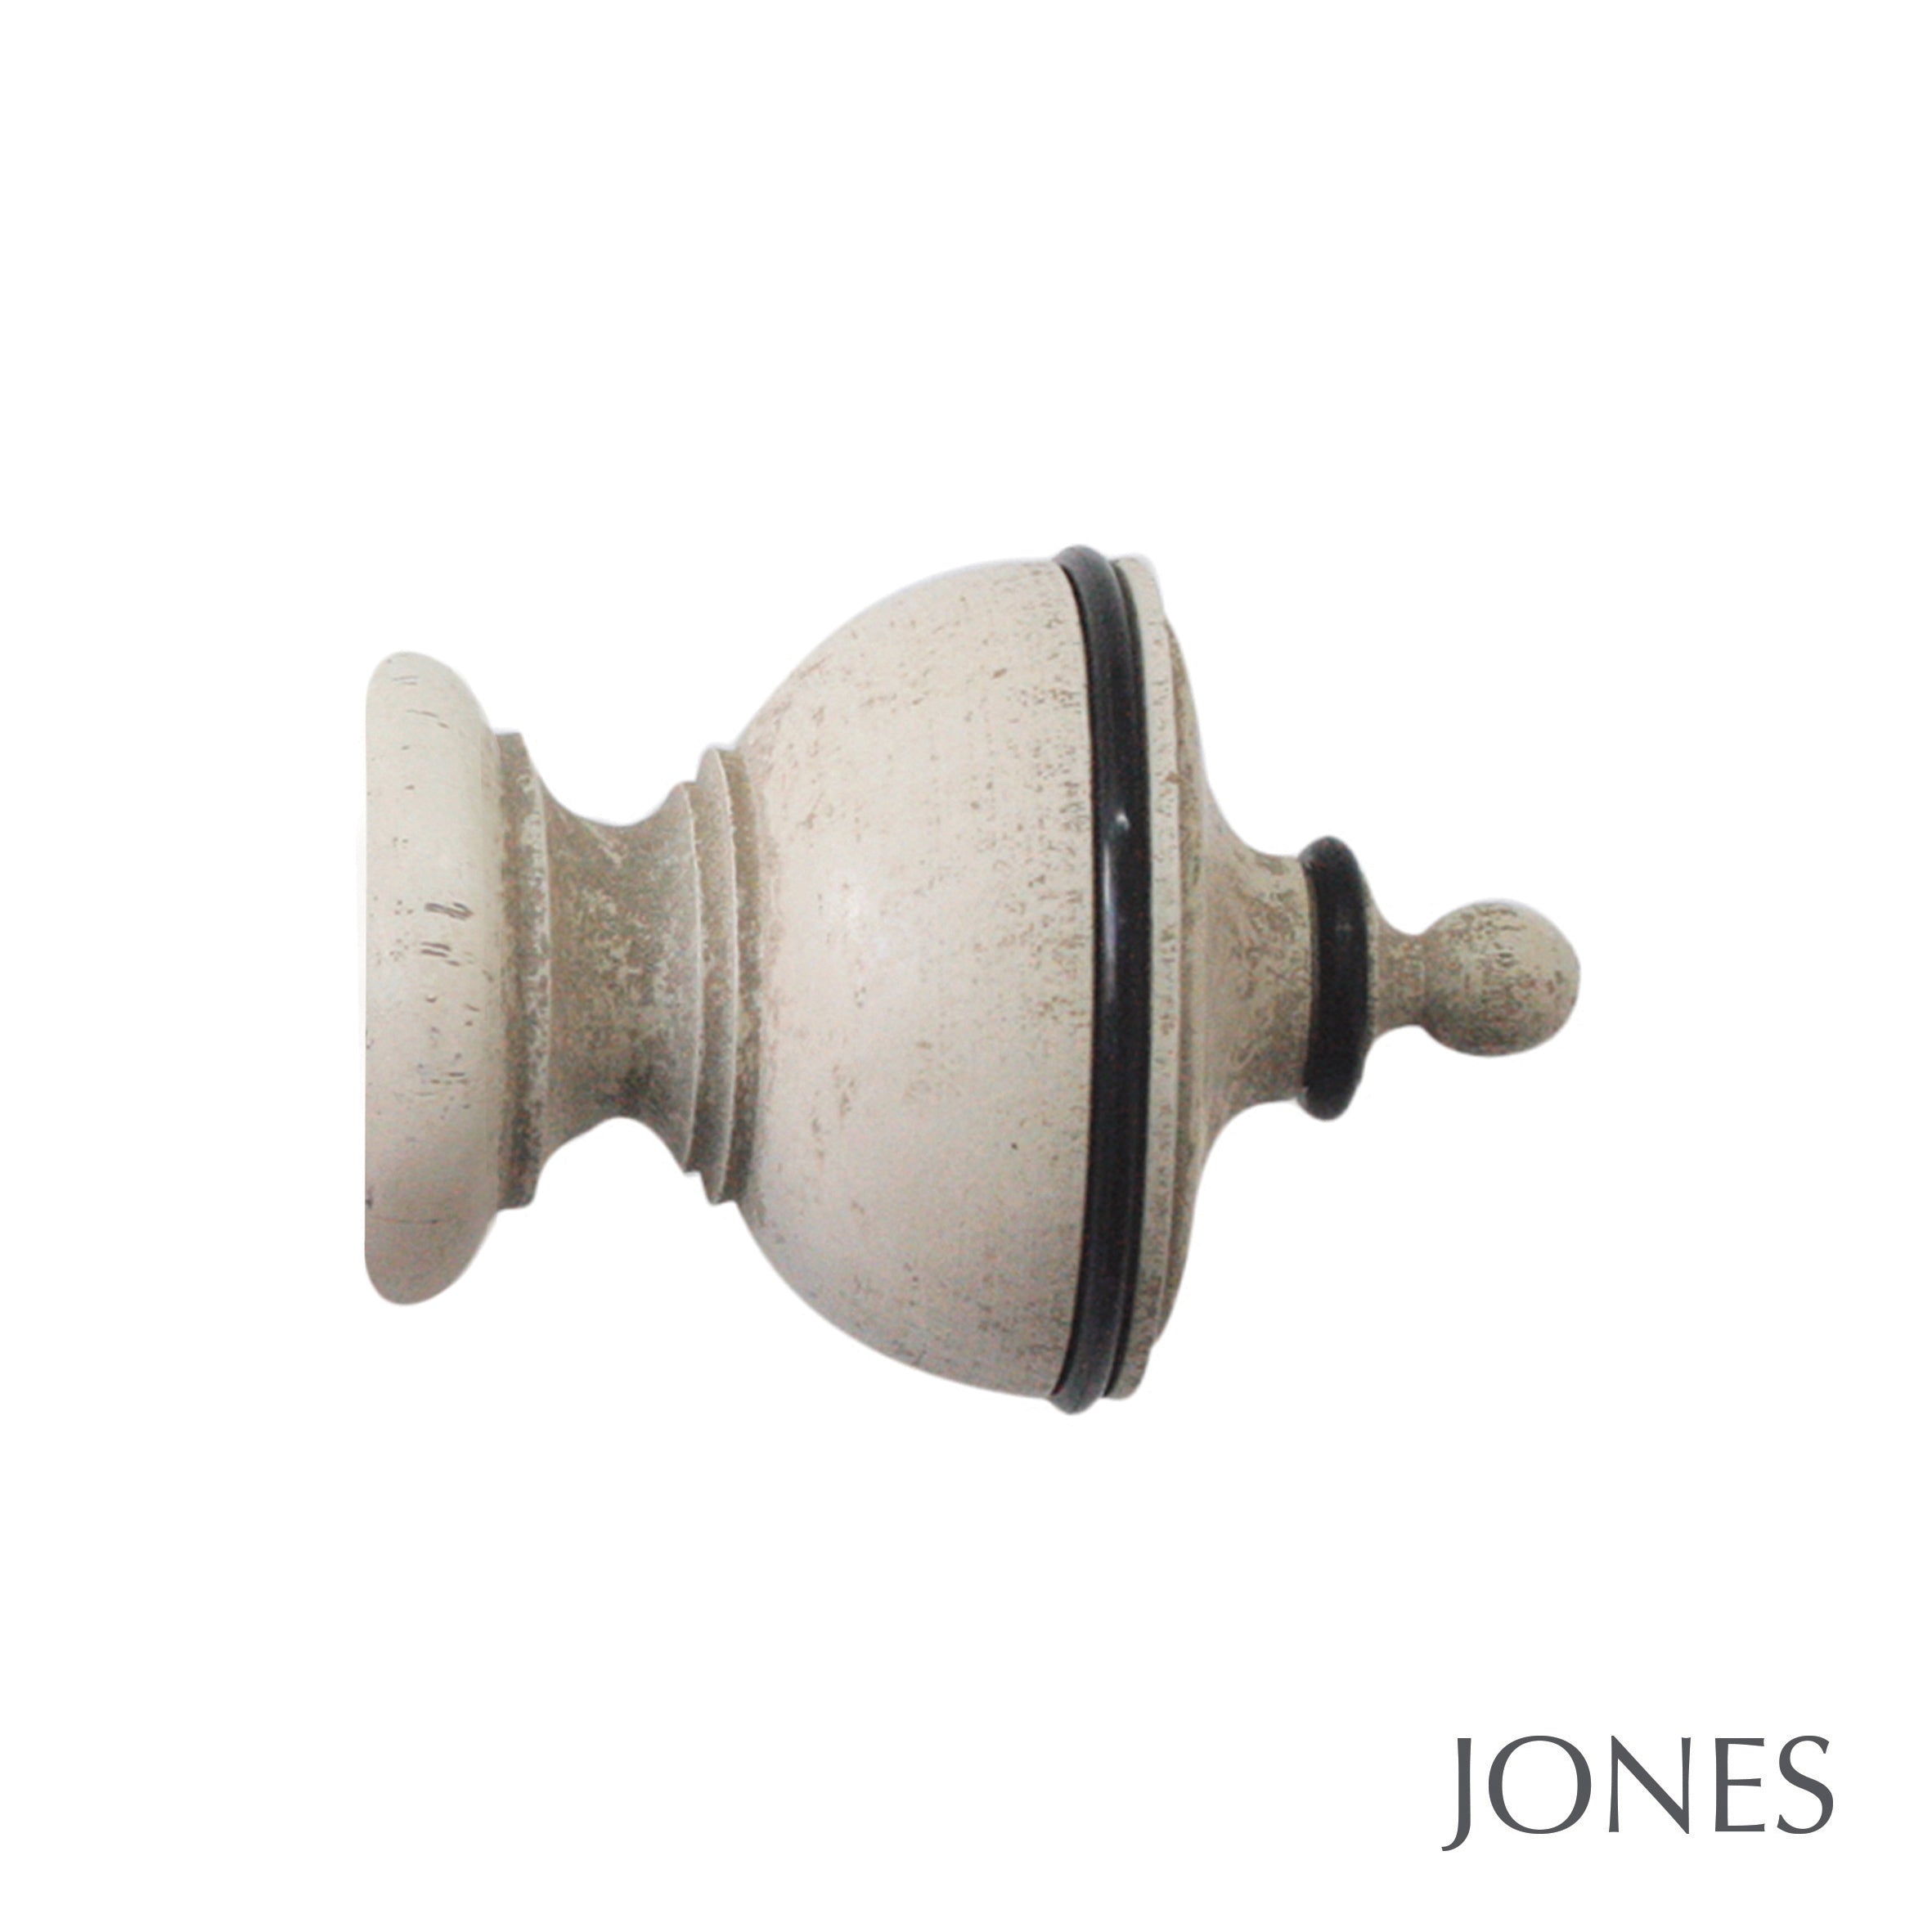 Jones Interiors Cathedral Exeter Finial Curtain Pole Set in Putty